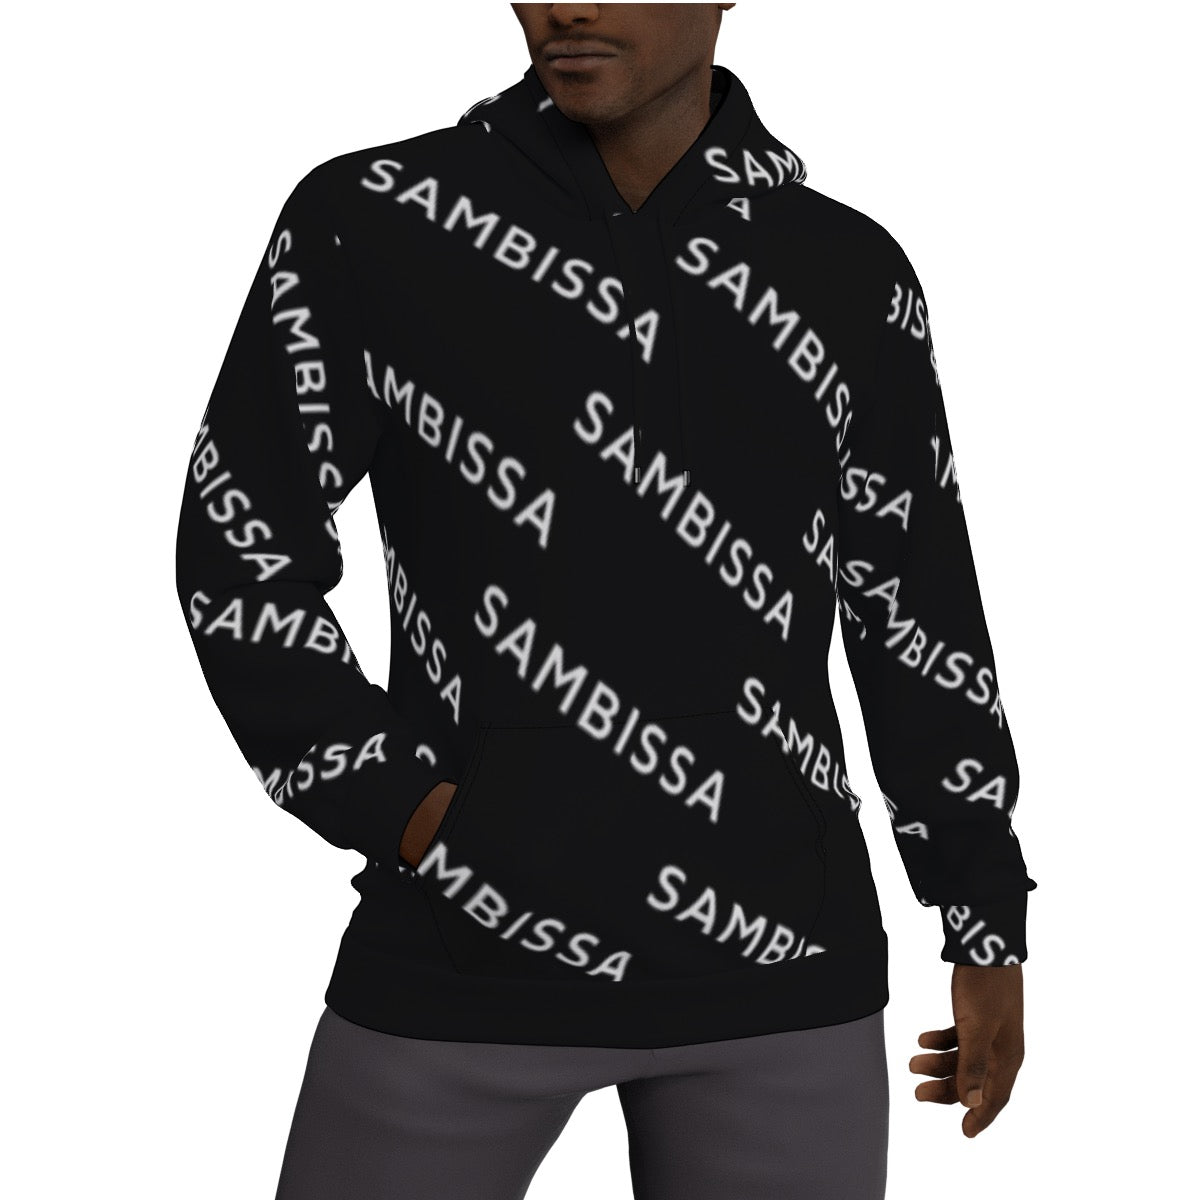 Sambissa All over print Pullover Hoodie